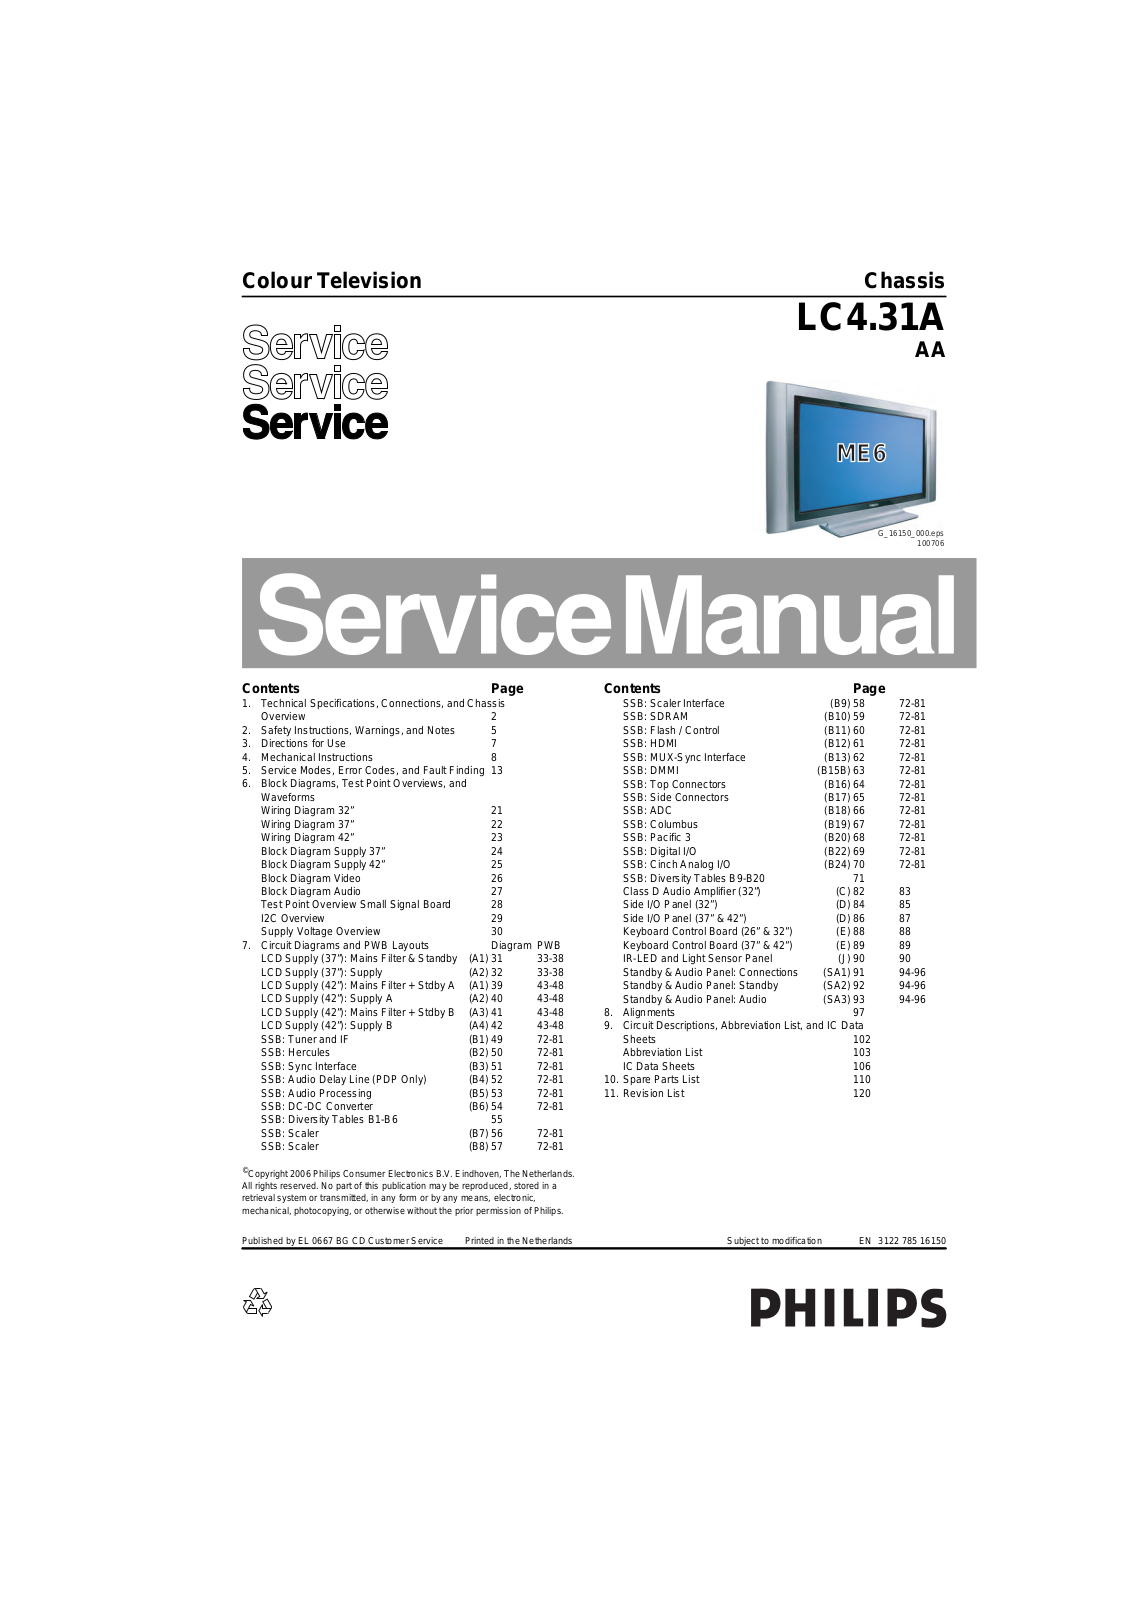 Philips LC4.31A AA Schematic